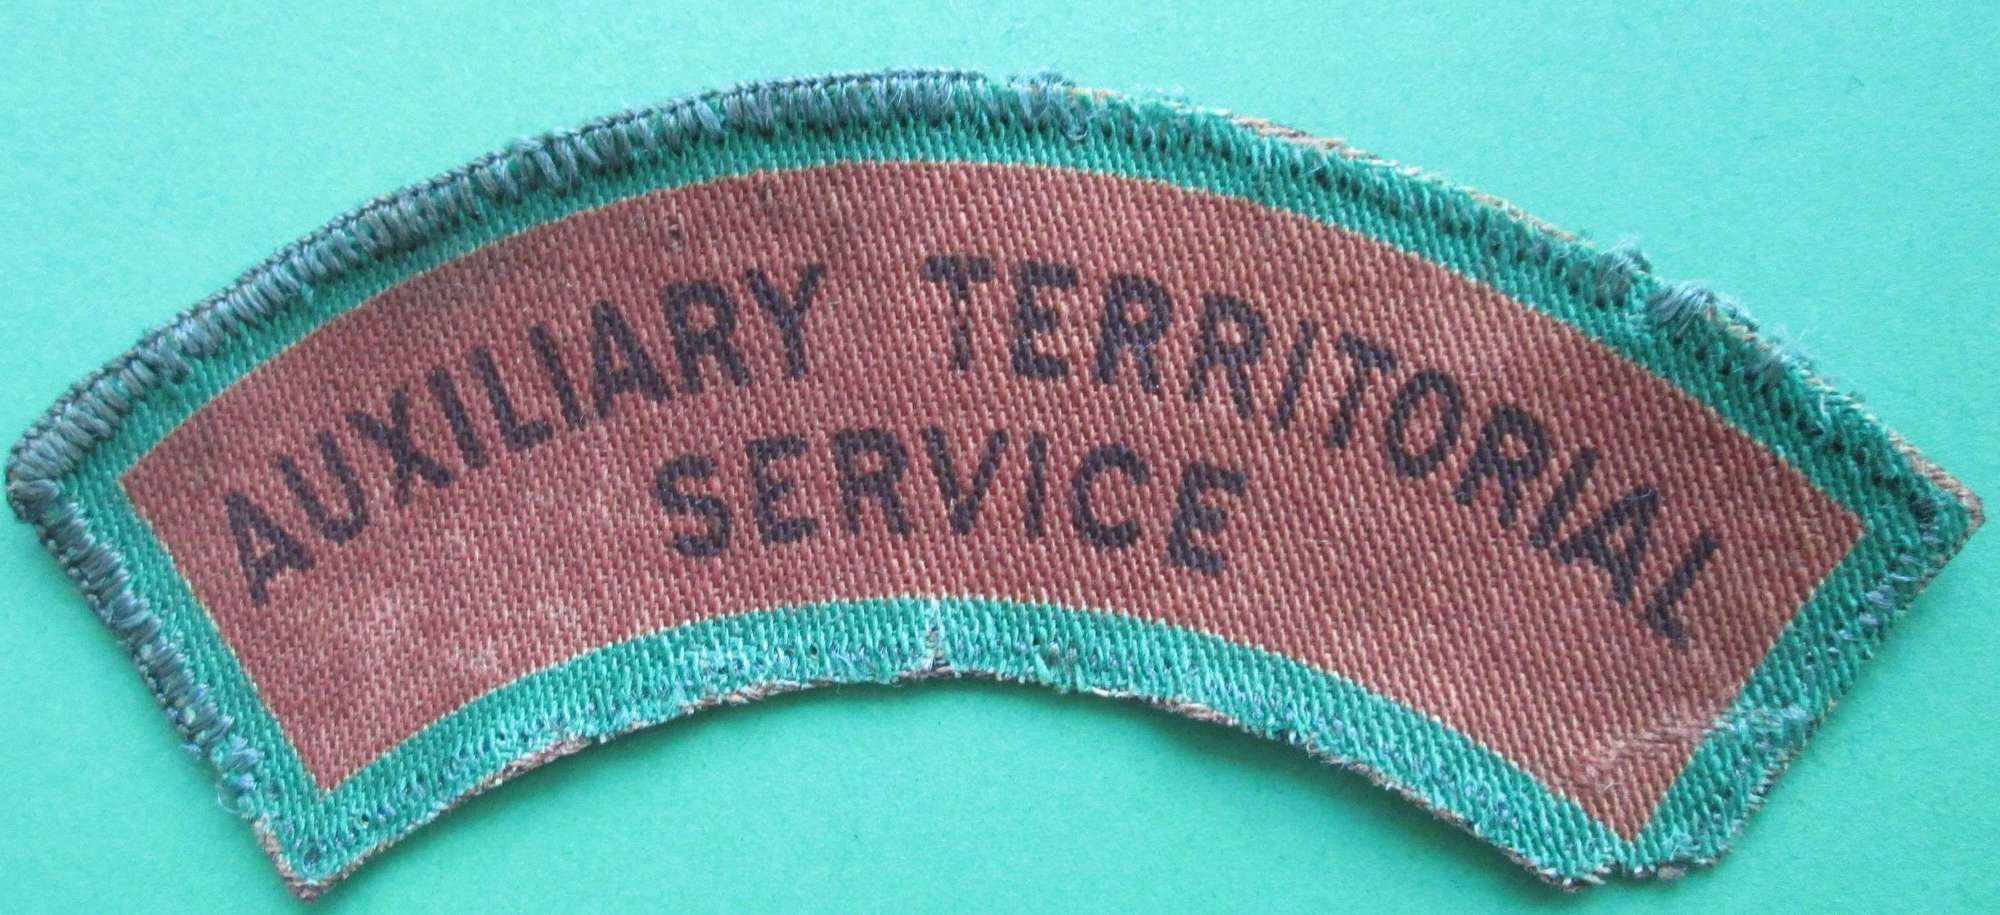 WWII PERIOD PRINTED WOMEN'S AUXILIARY SERVICE TITLE